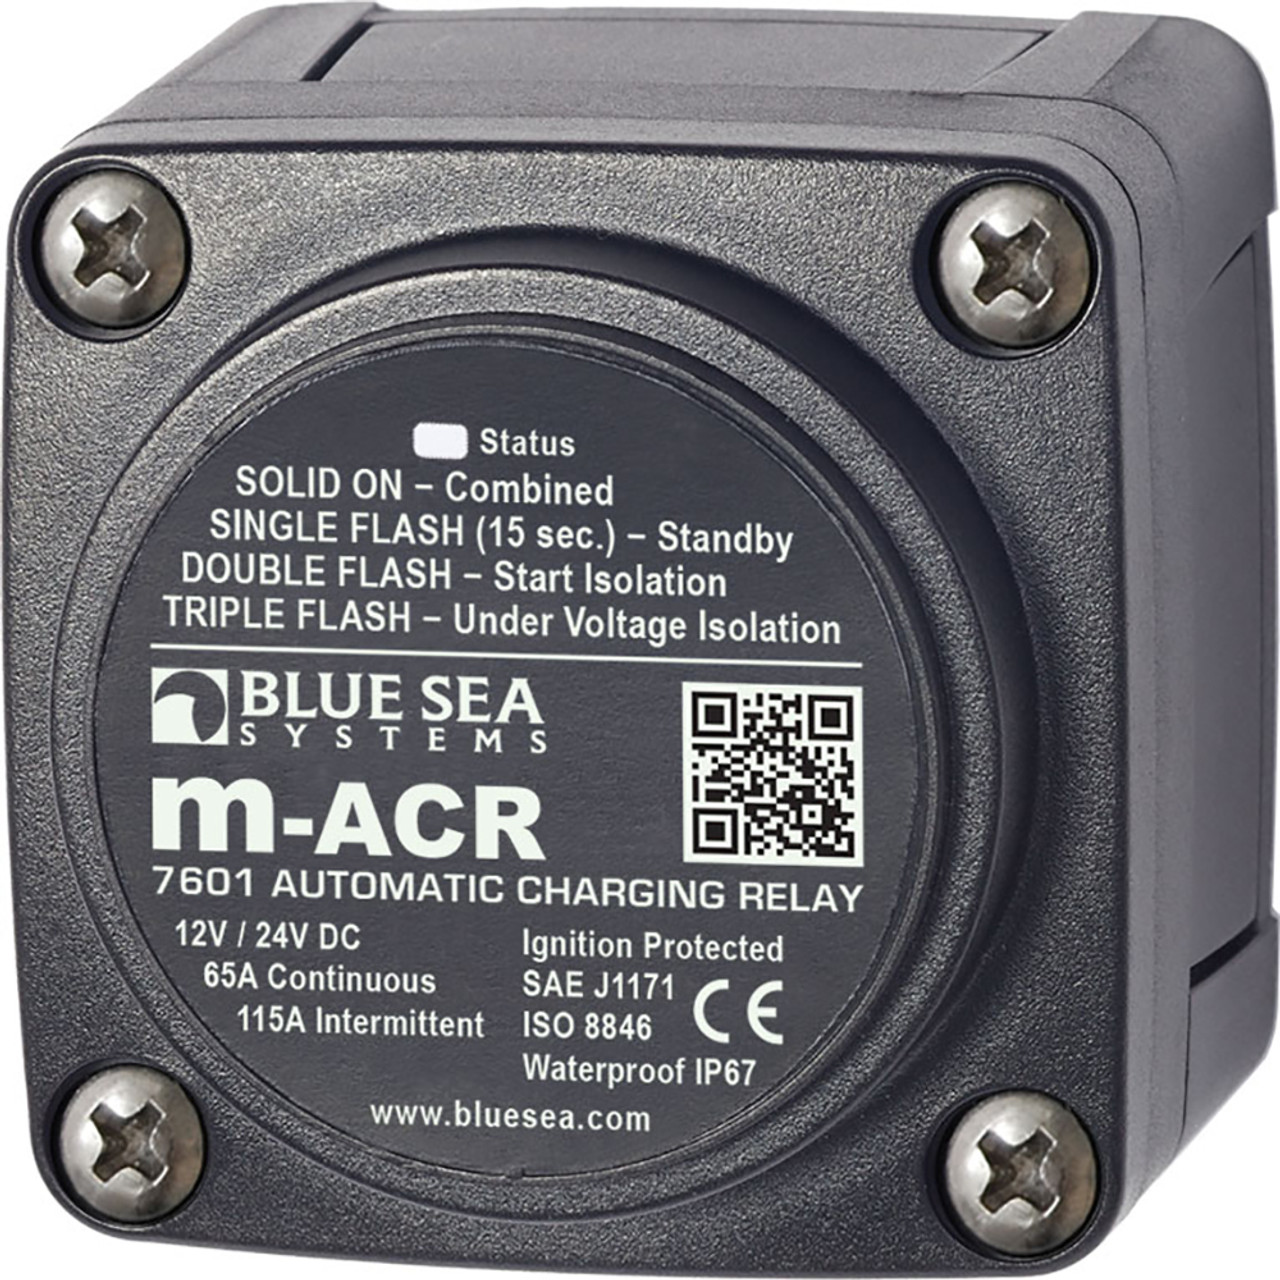 Blue Sea System - 7601 DC Mini ACR Automatic Charging Relay - 12/24V DC, 65 Amp - Apollo Lighting